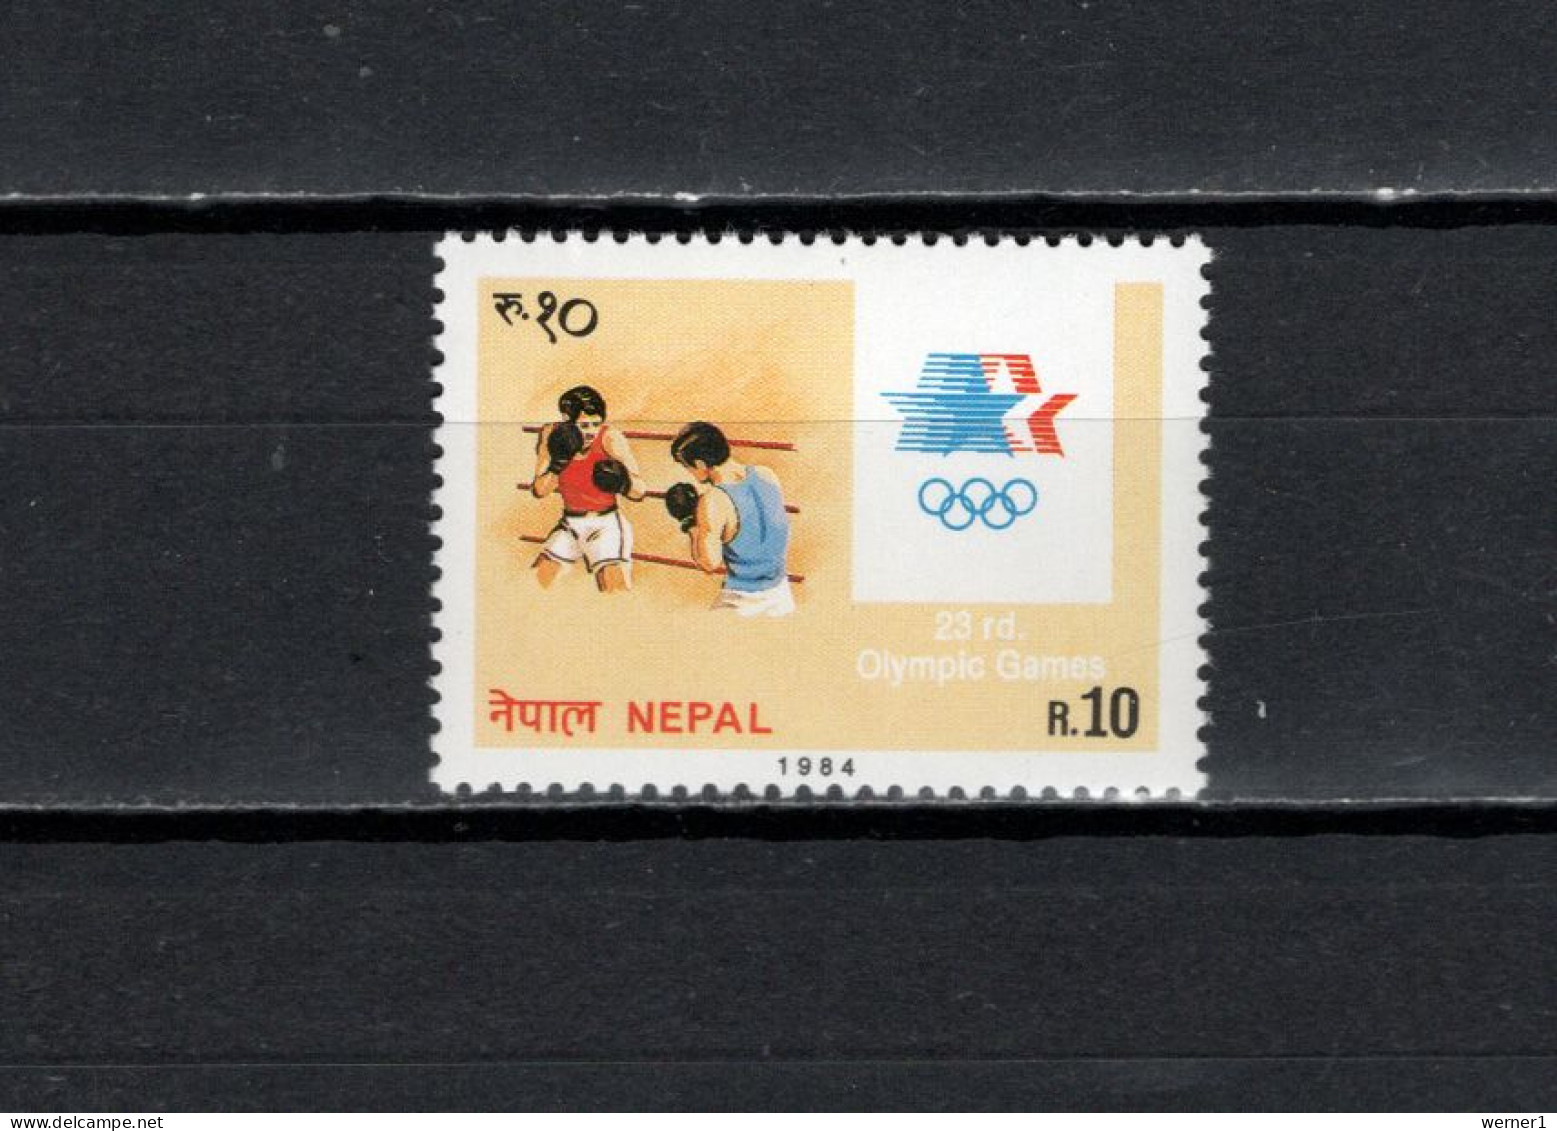 Nepal 1984 Olympic Games Los Angeles, Boxing Stamp MNH - Verano 1984: Los Angeles